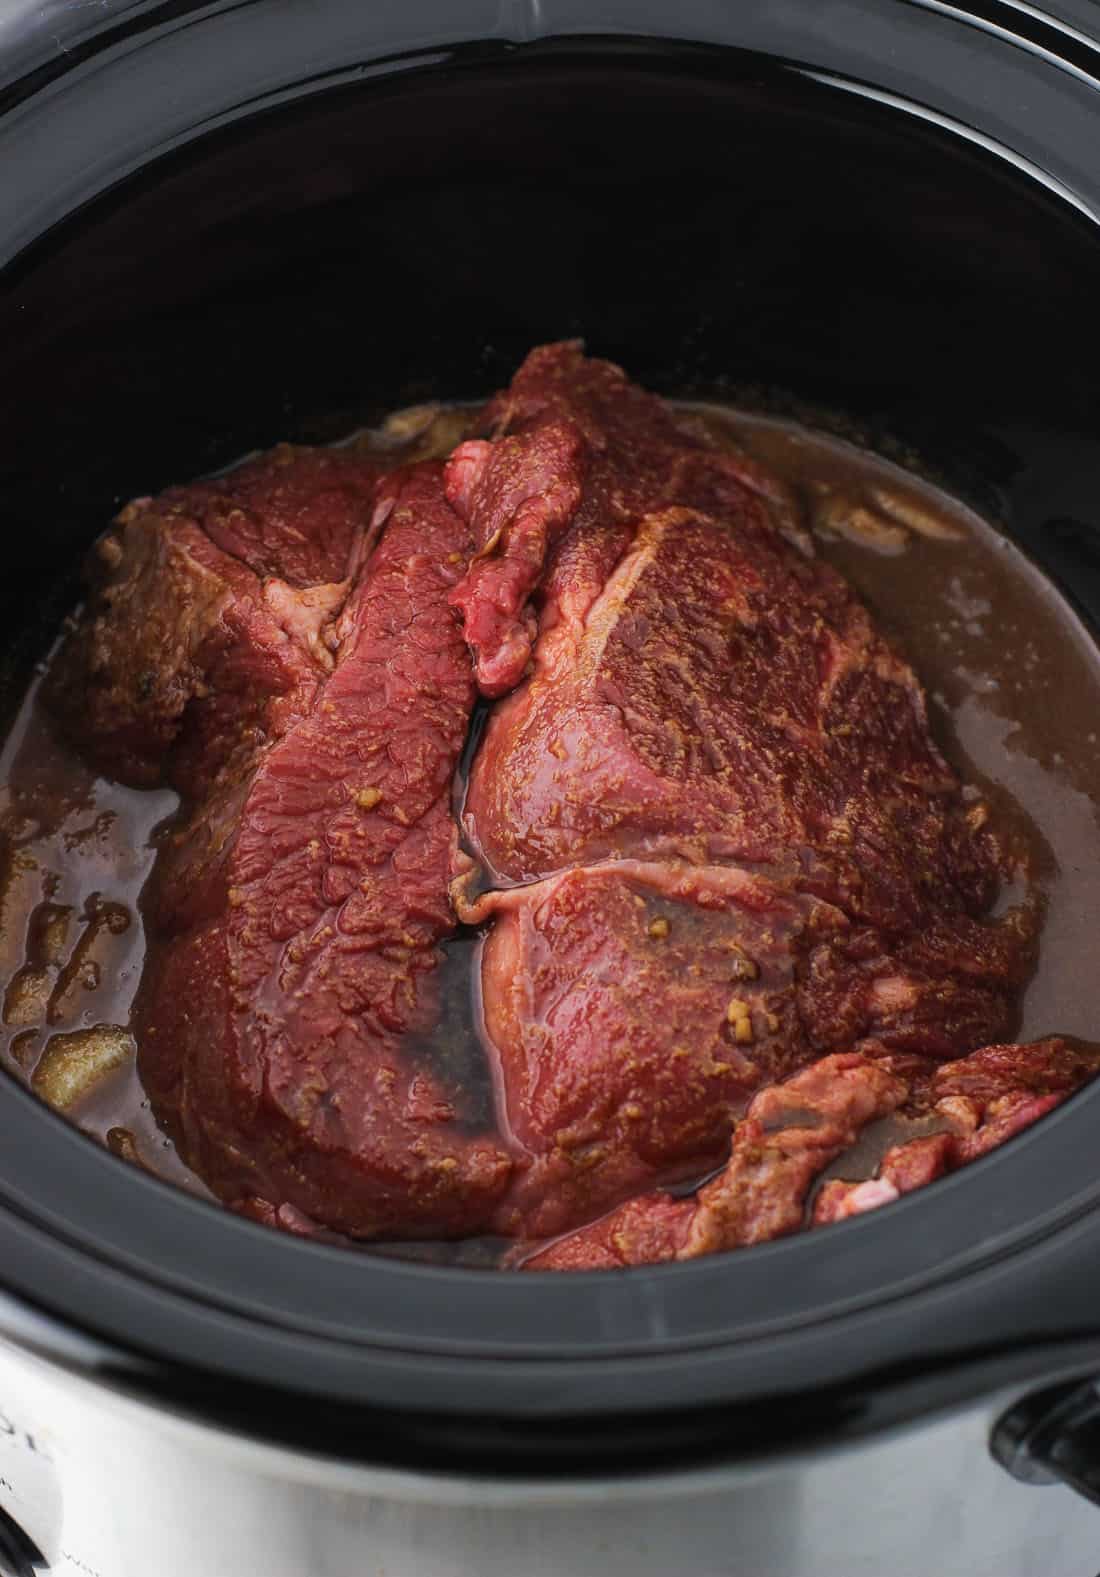 A chuck roast in the slow cooker with the rest of the ingredients before slow cooking